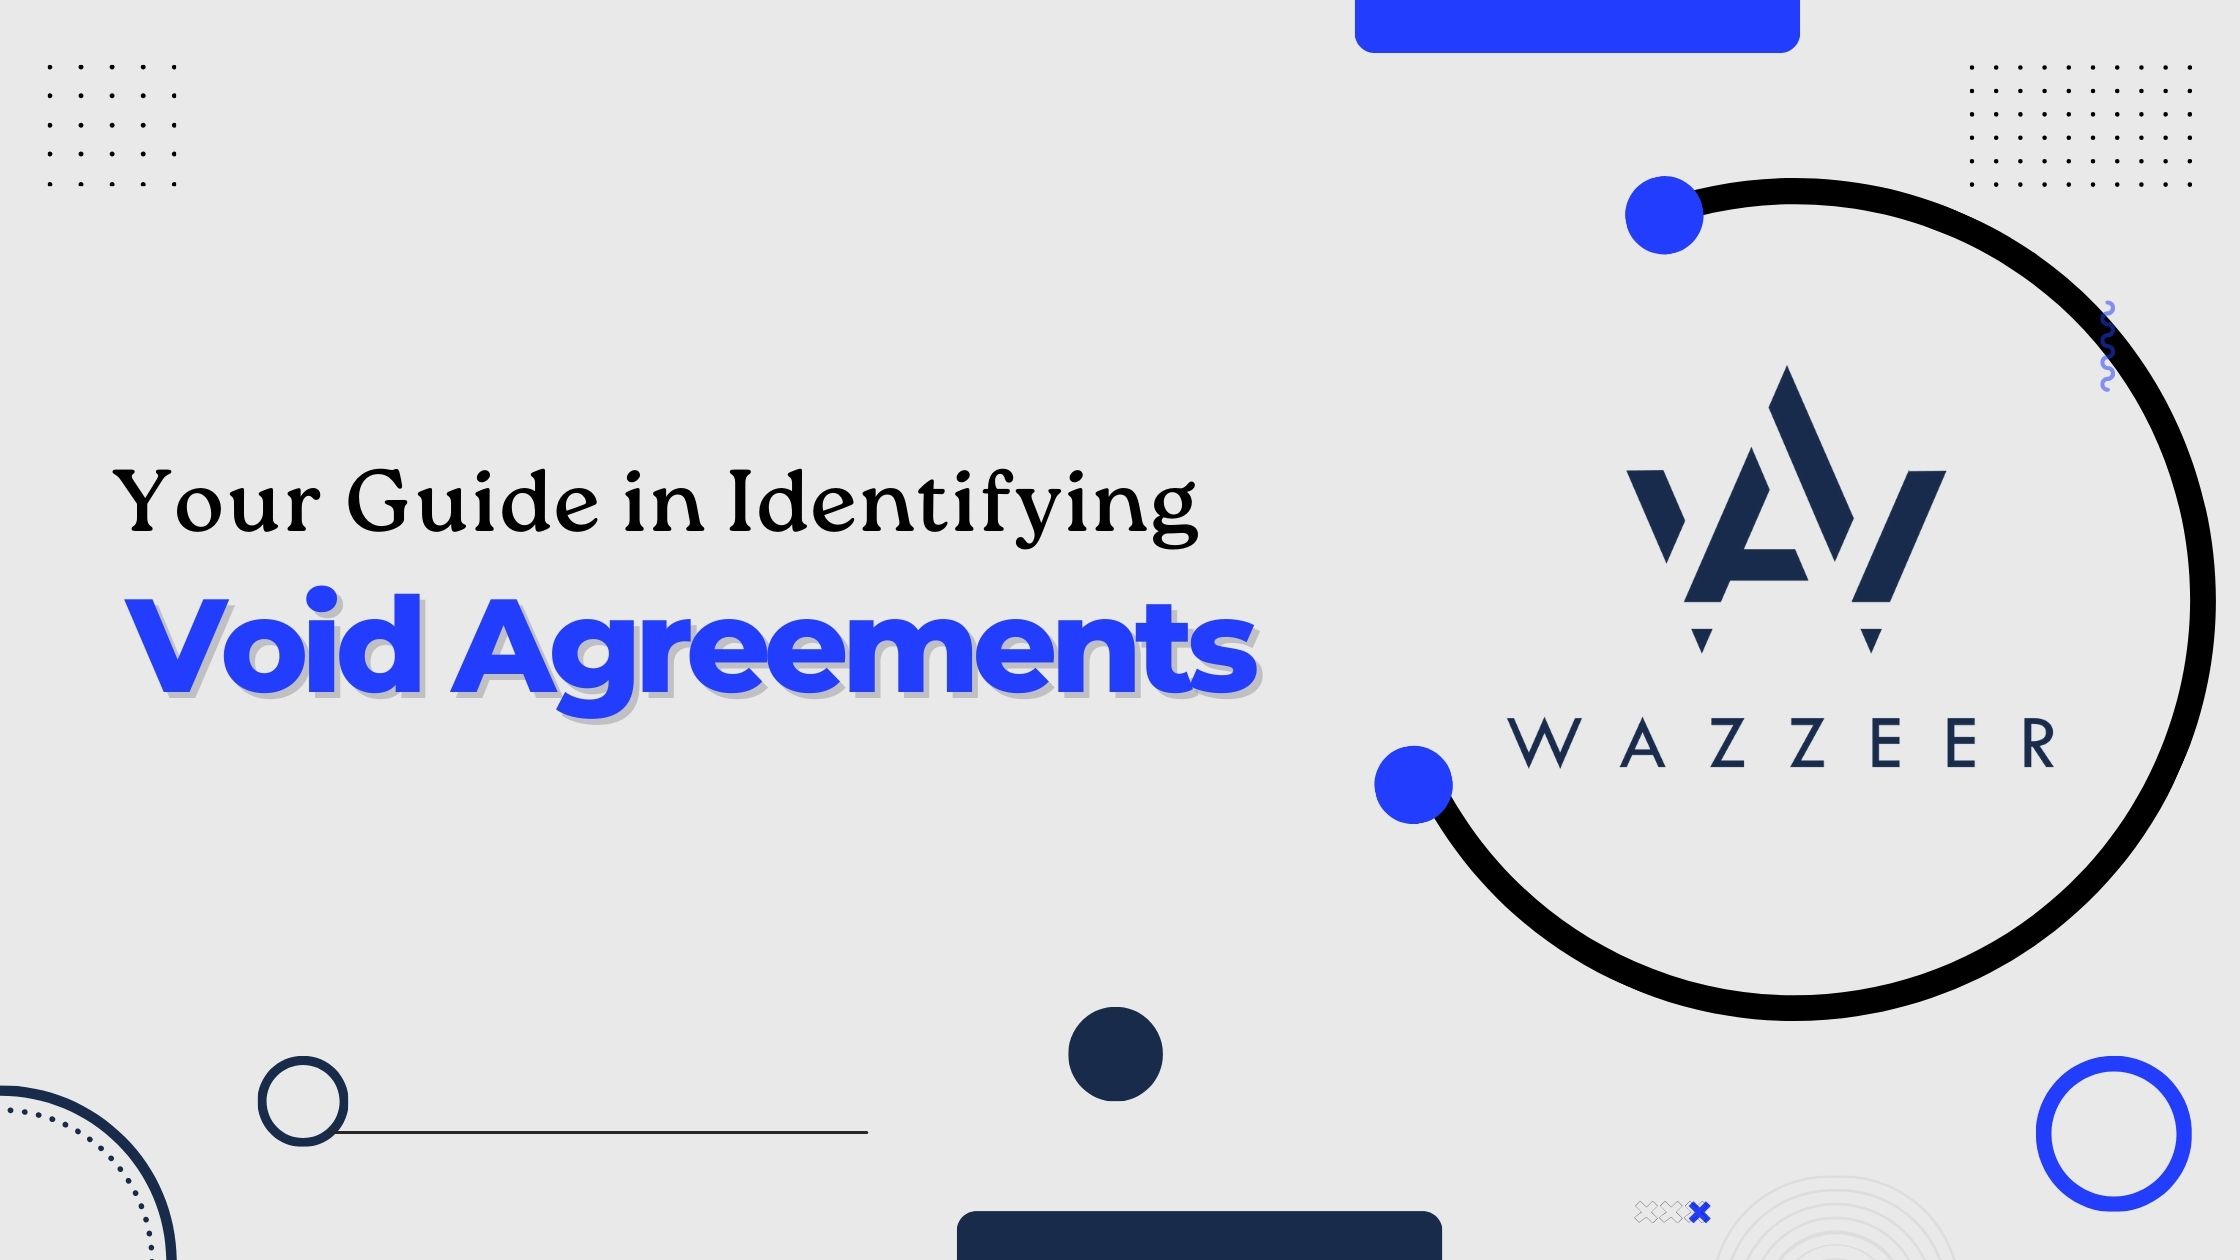 Your Guide in Identifying Void Agreements